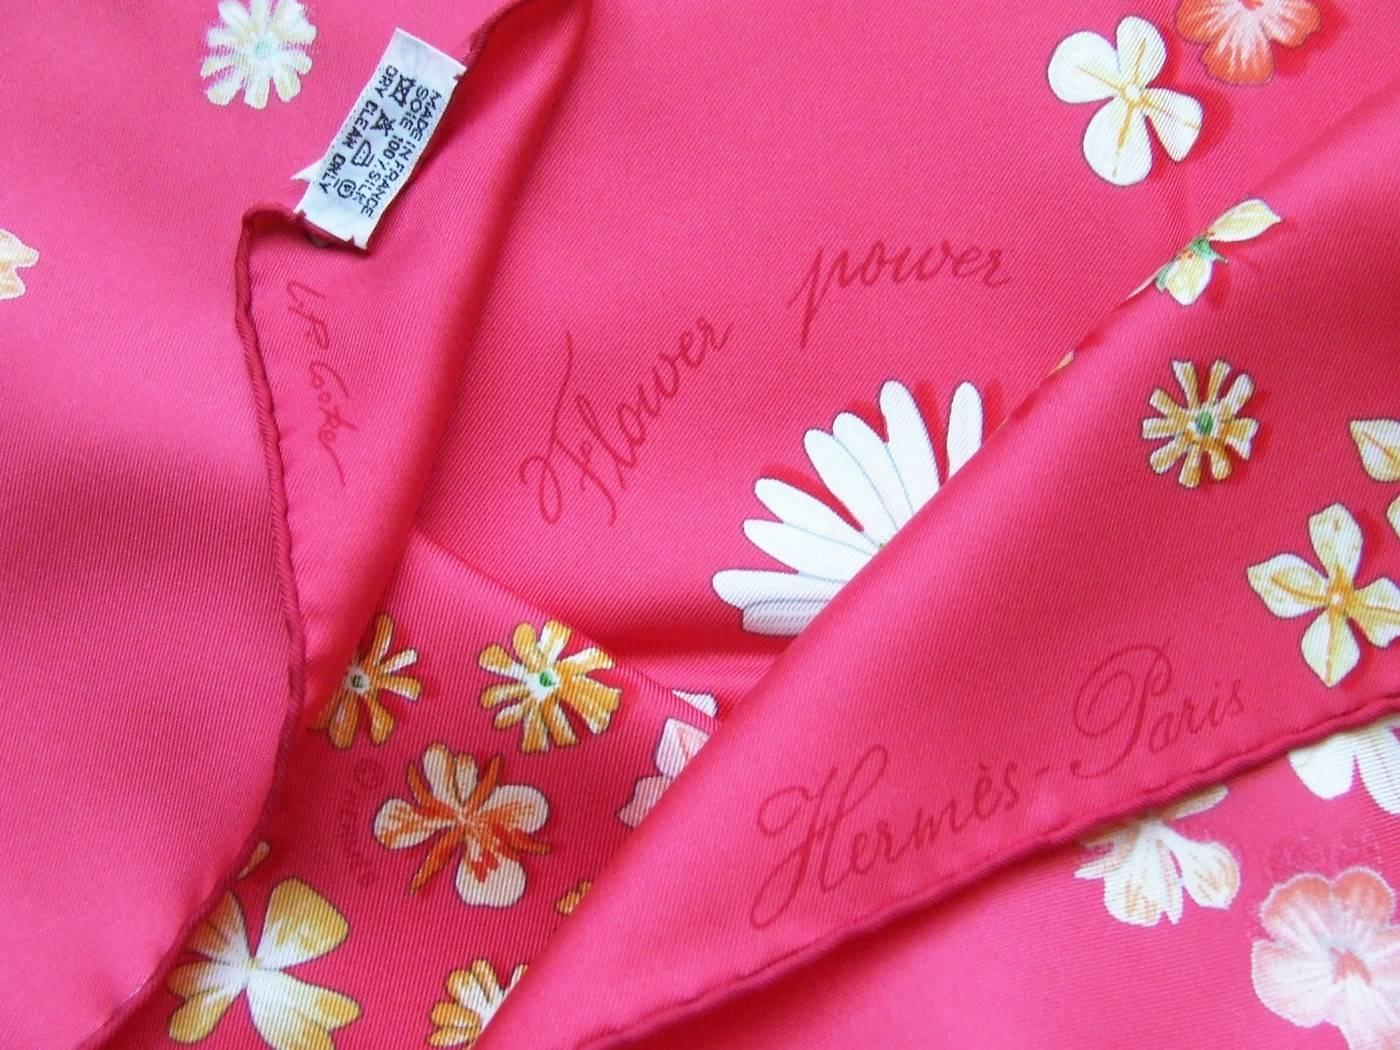 Authentic Hermes Silk Scarf Flower Power Pink P. COOKE 90 cm 5